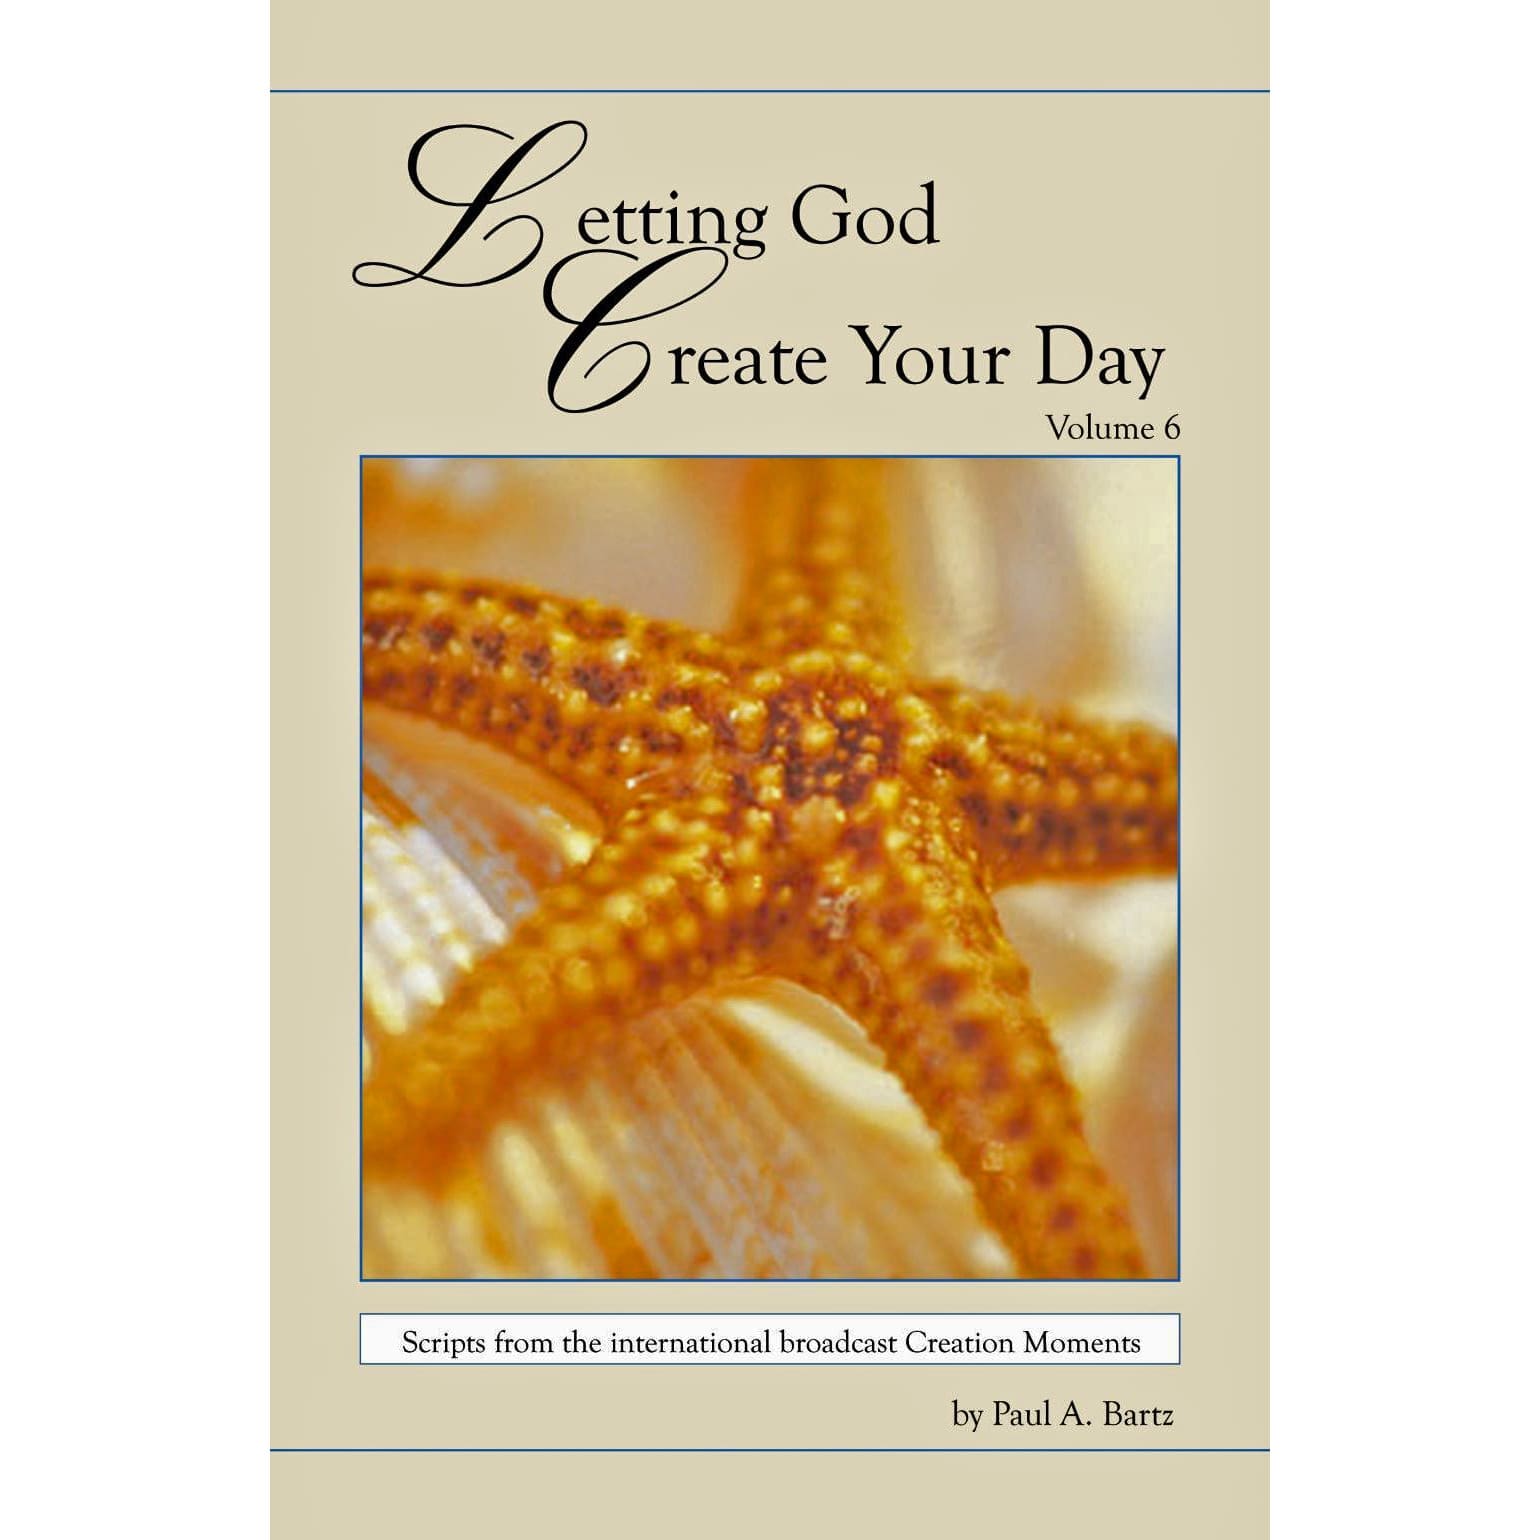 Letting God Create Your Day Vol. 6 Book by Paul A. Bartz | CM - Devotionals